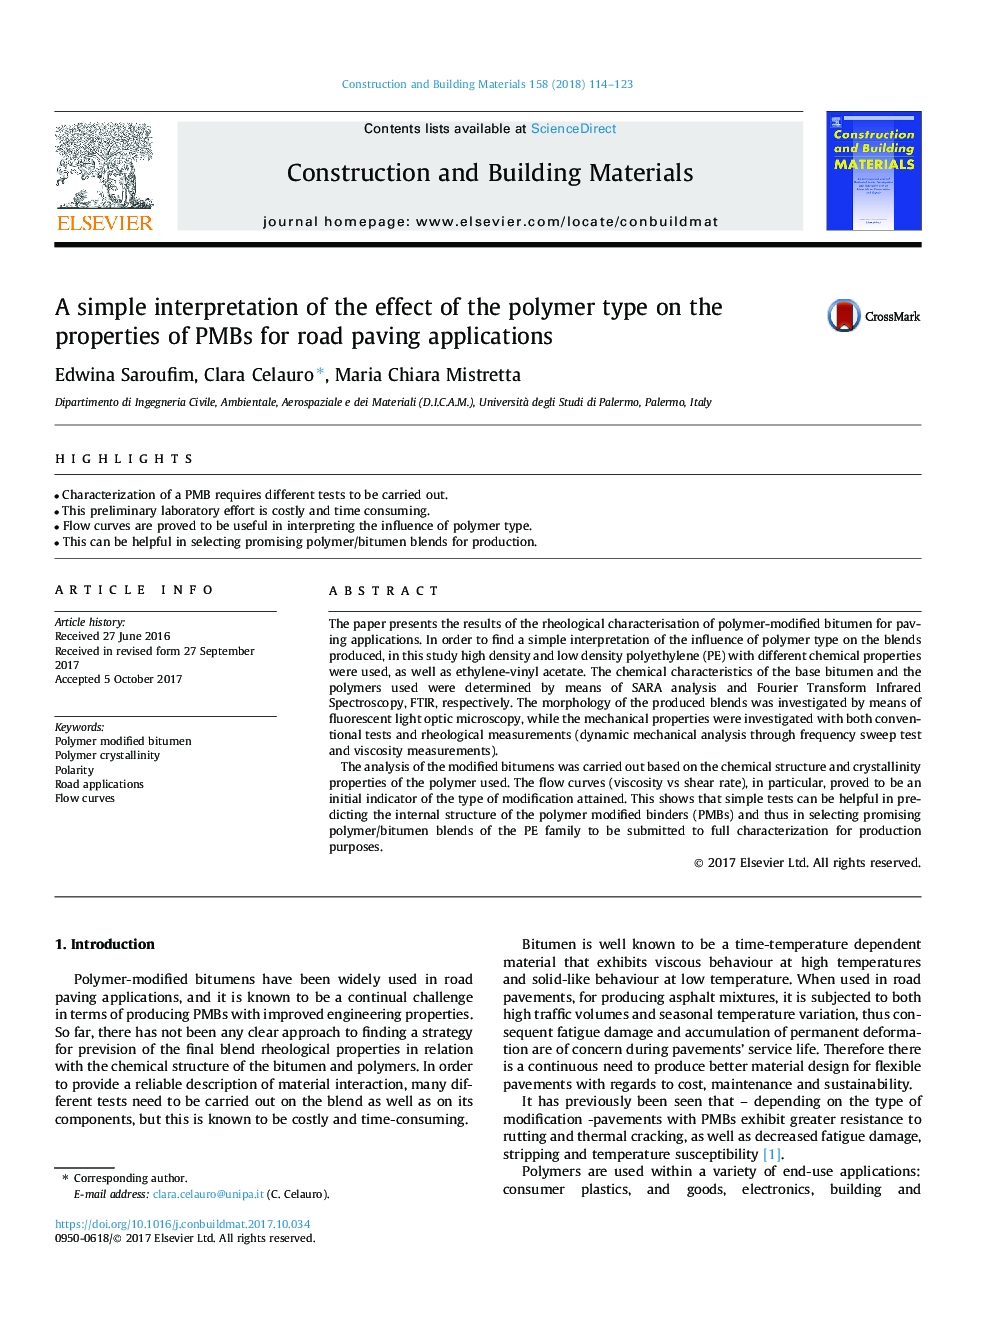 A simple interpretation of the effect of the polymer type on the properties of PMBs for road paving applications